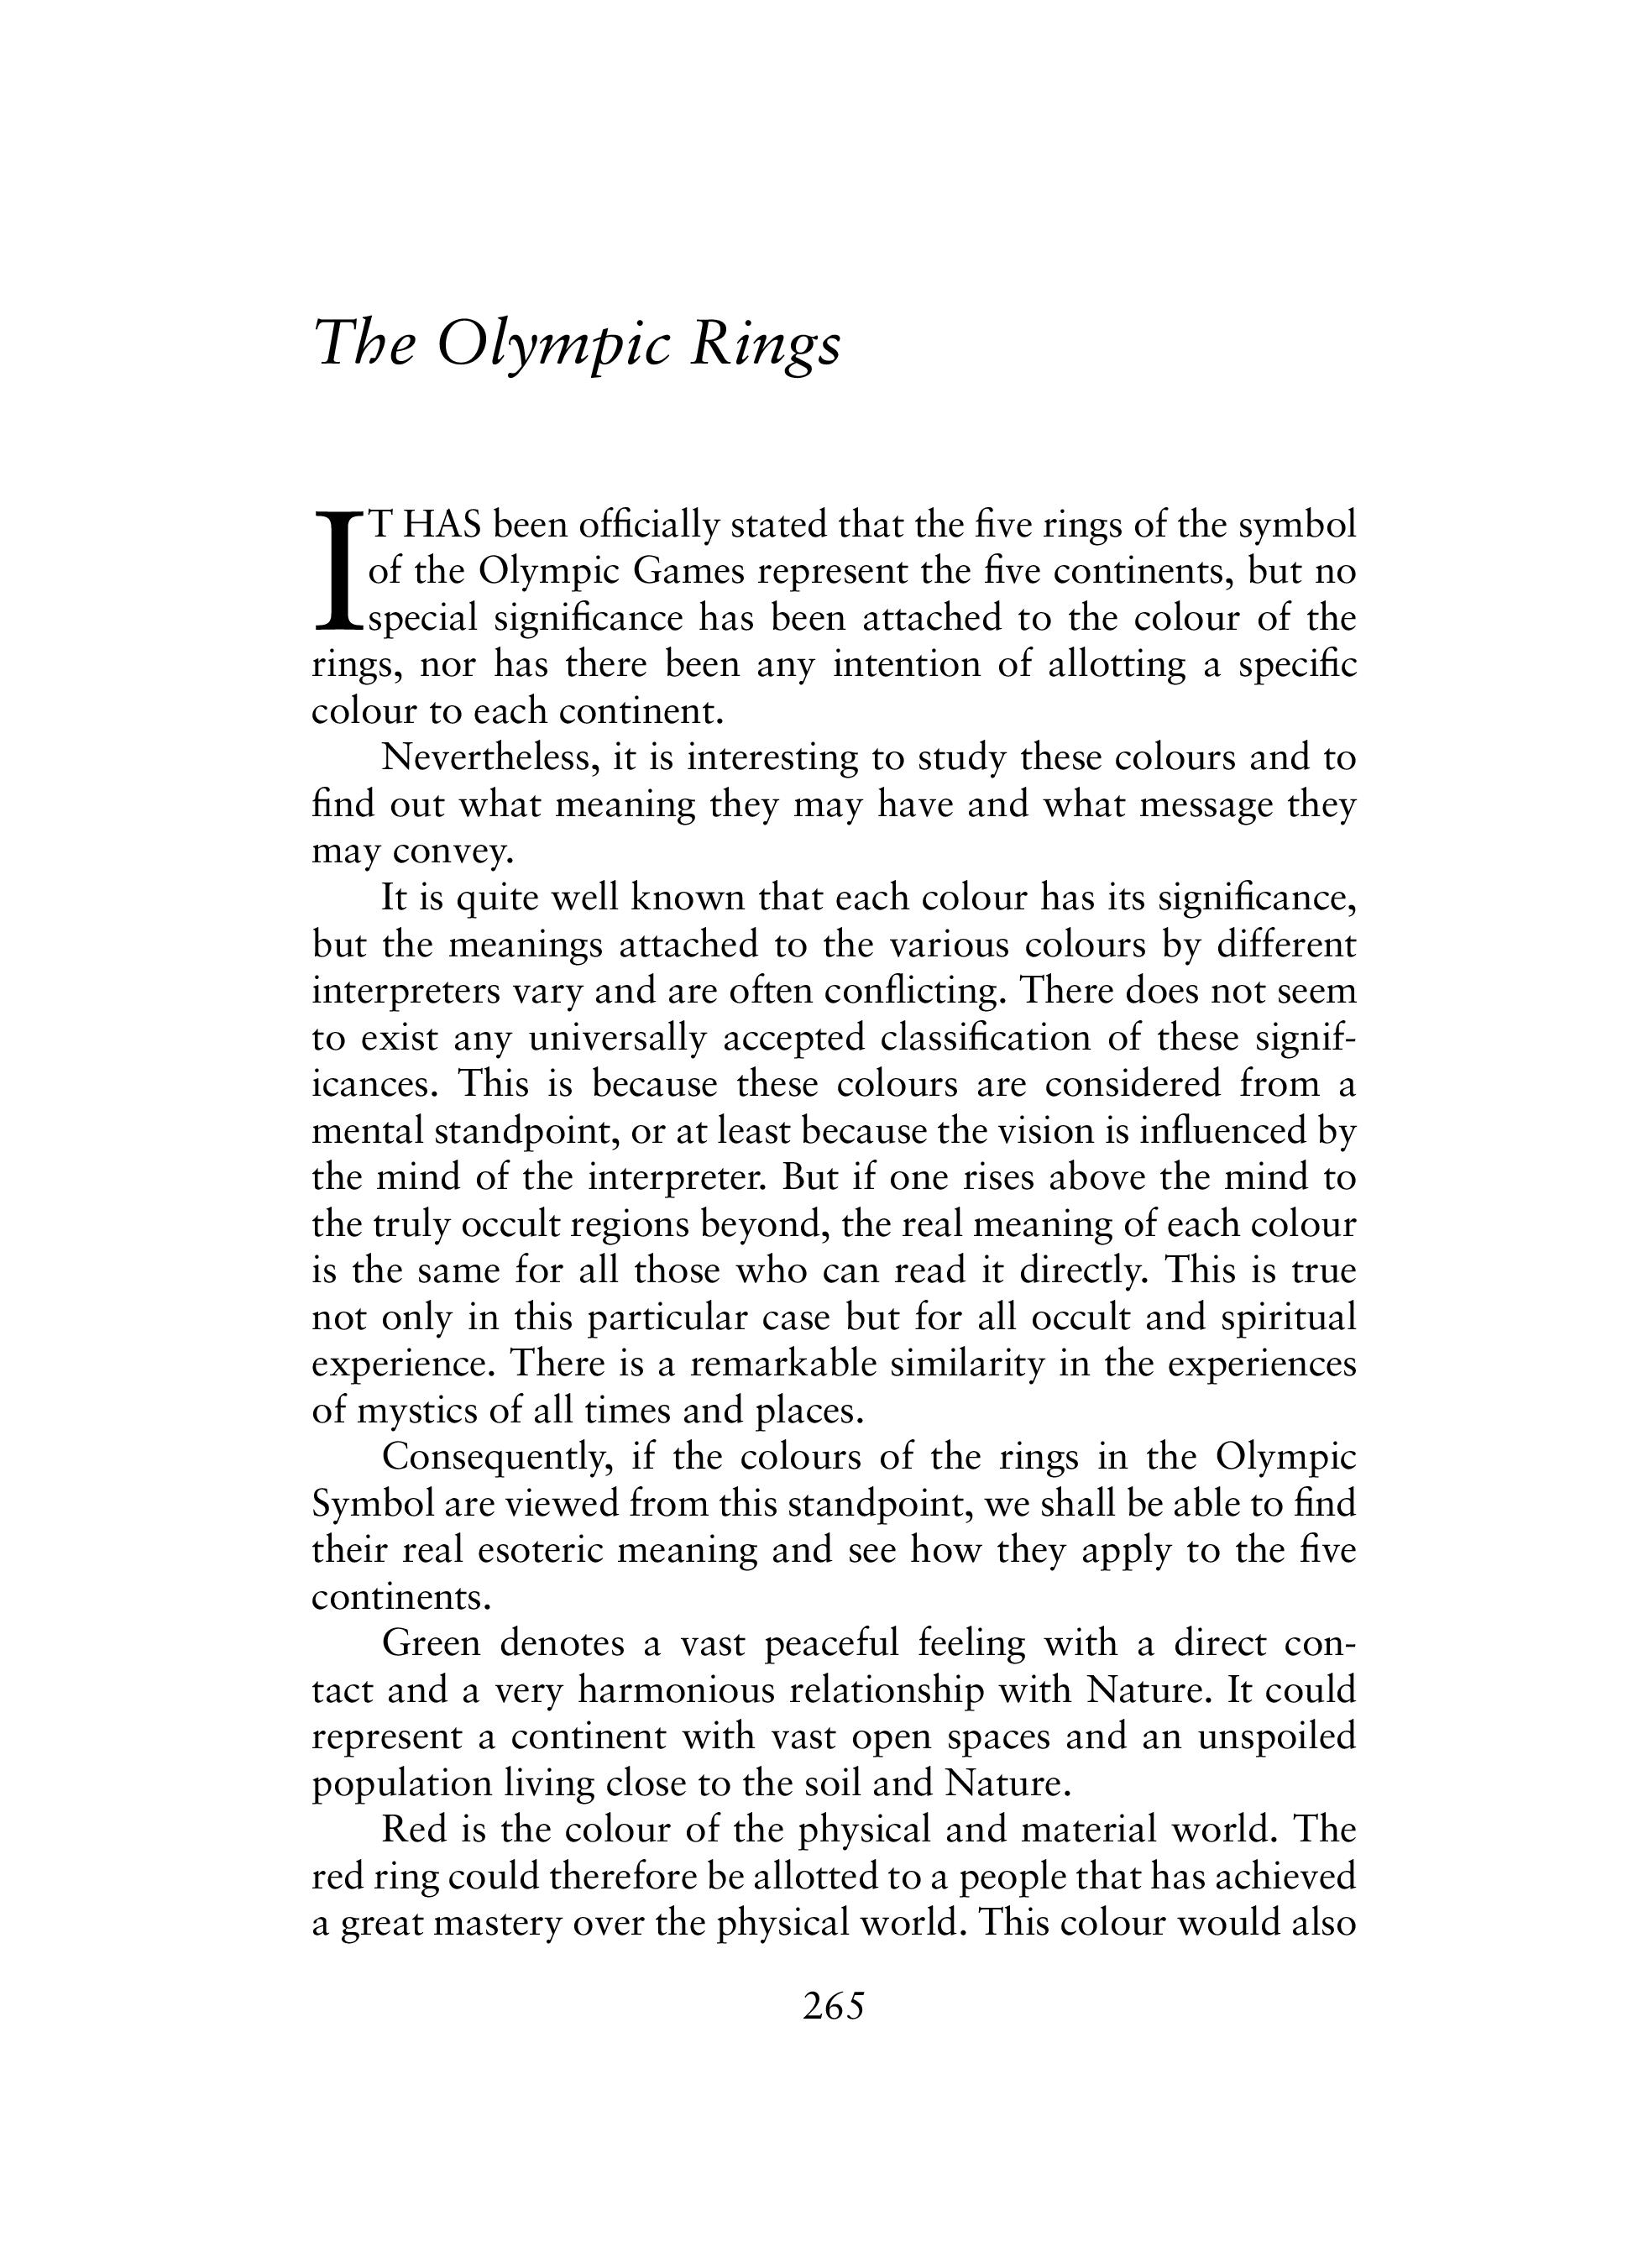 10 Surprising Facts Of Olympics Day You Should Know - KopyKitab Blog